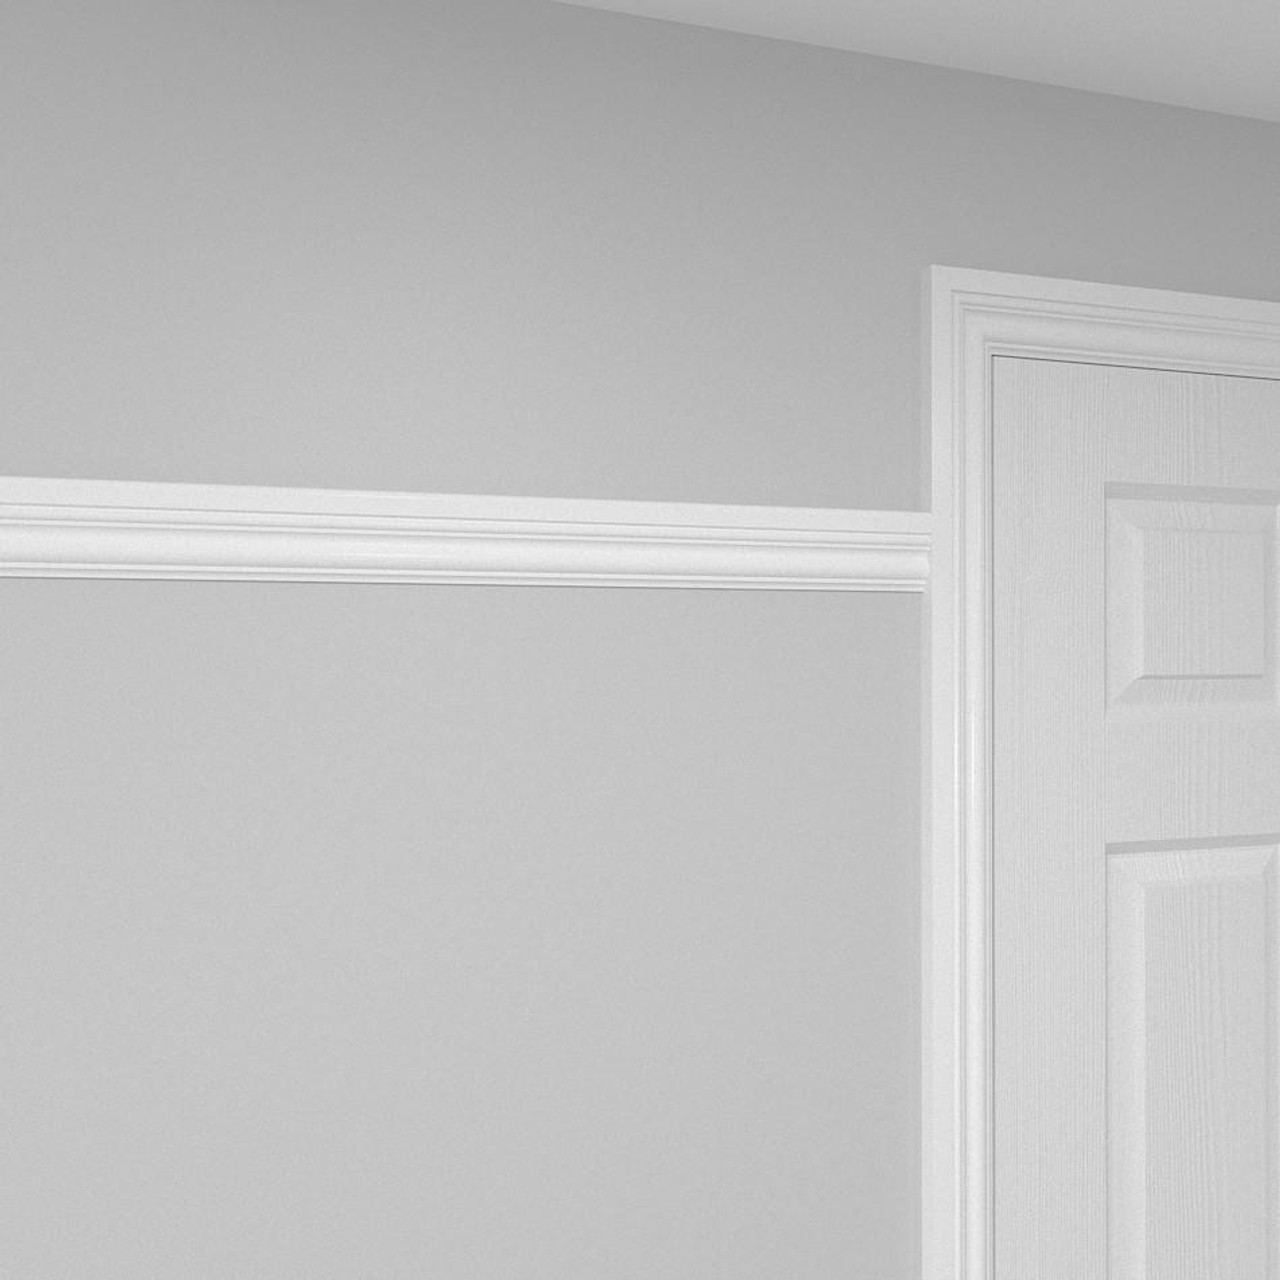 A picture rail installed on a wall, conjoined to architraves.